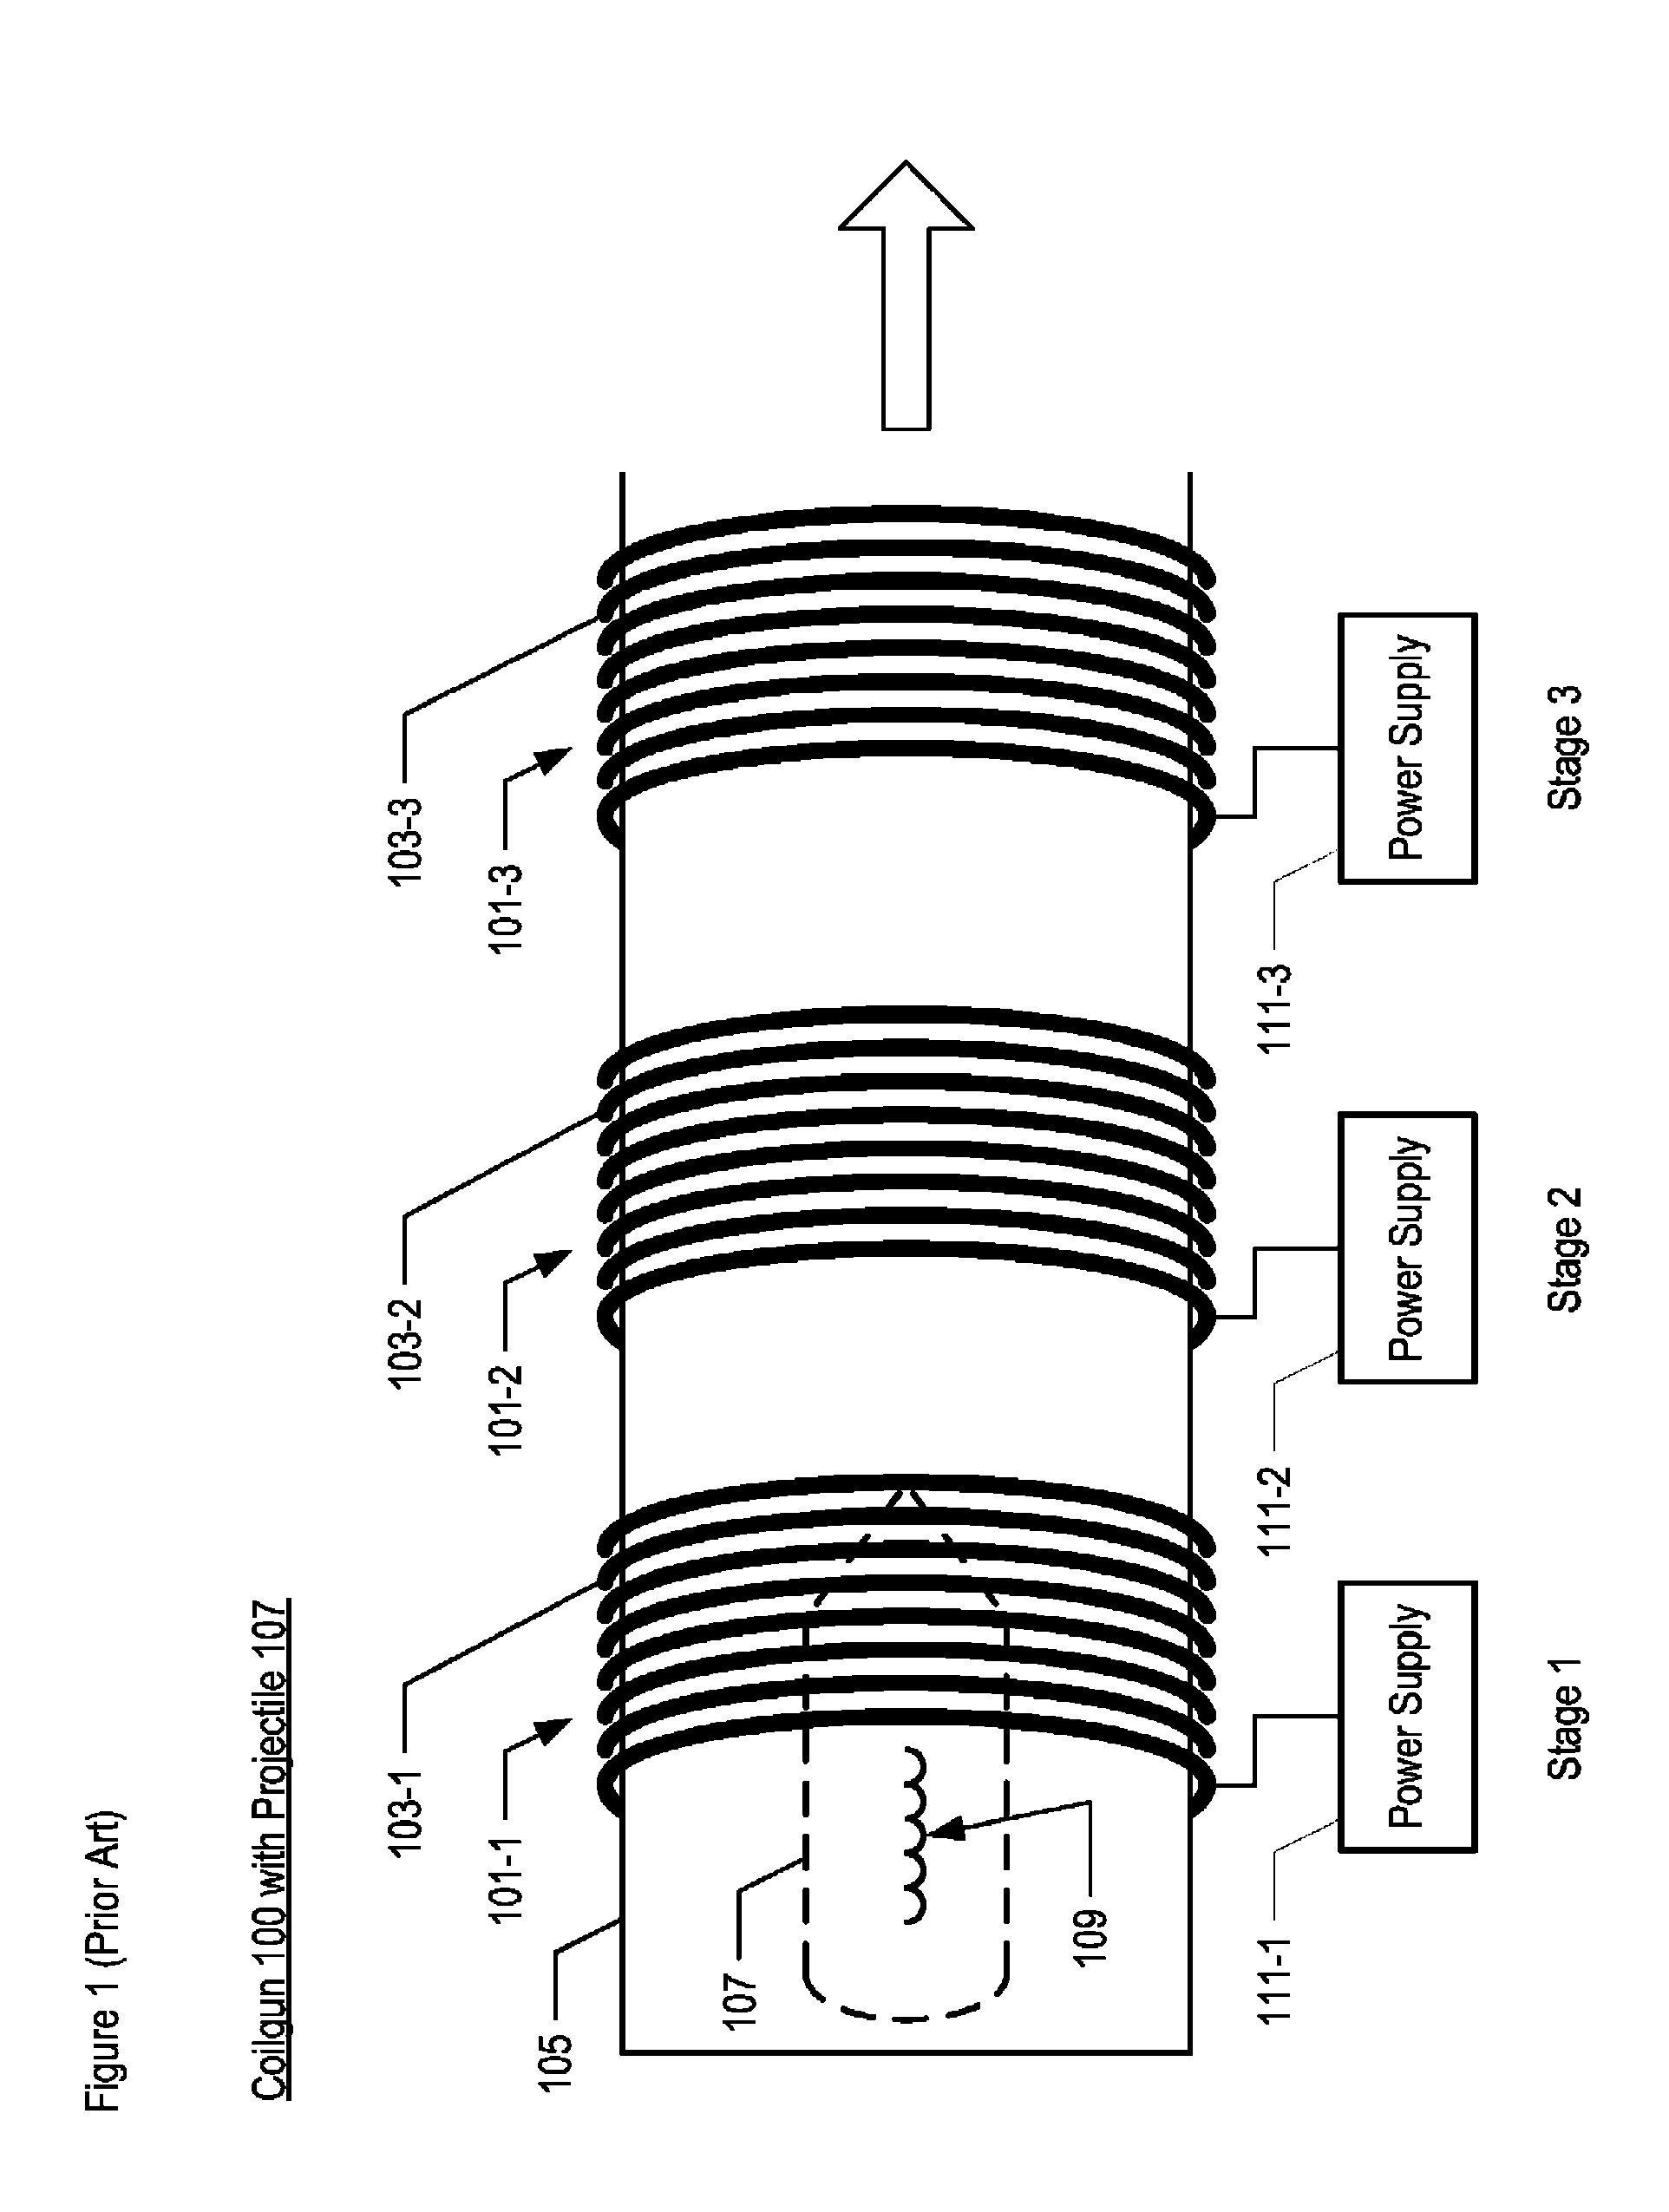 Thermal management of a propulsion circuit in an electromagnetic munition launcher